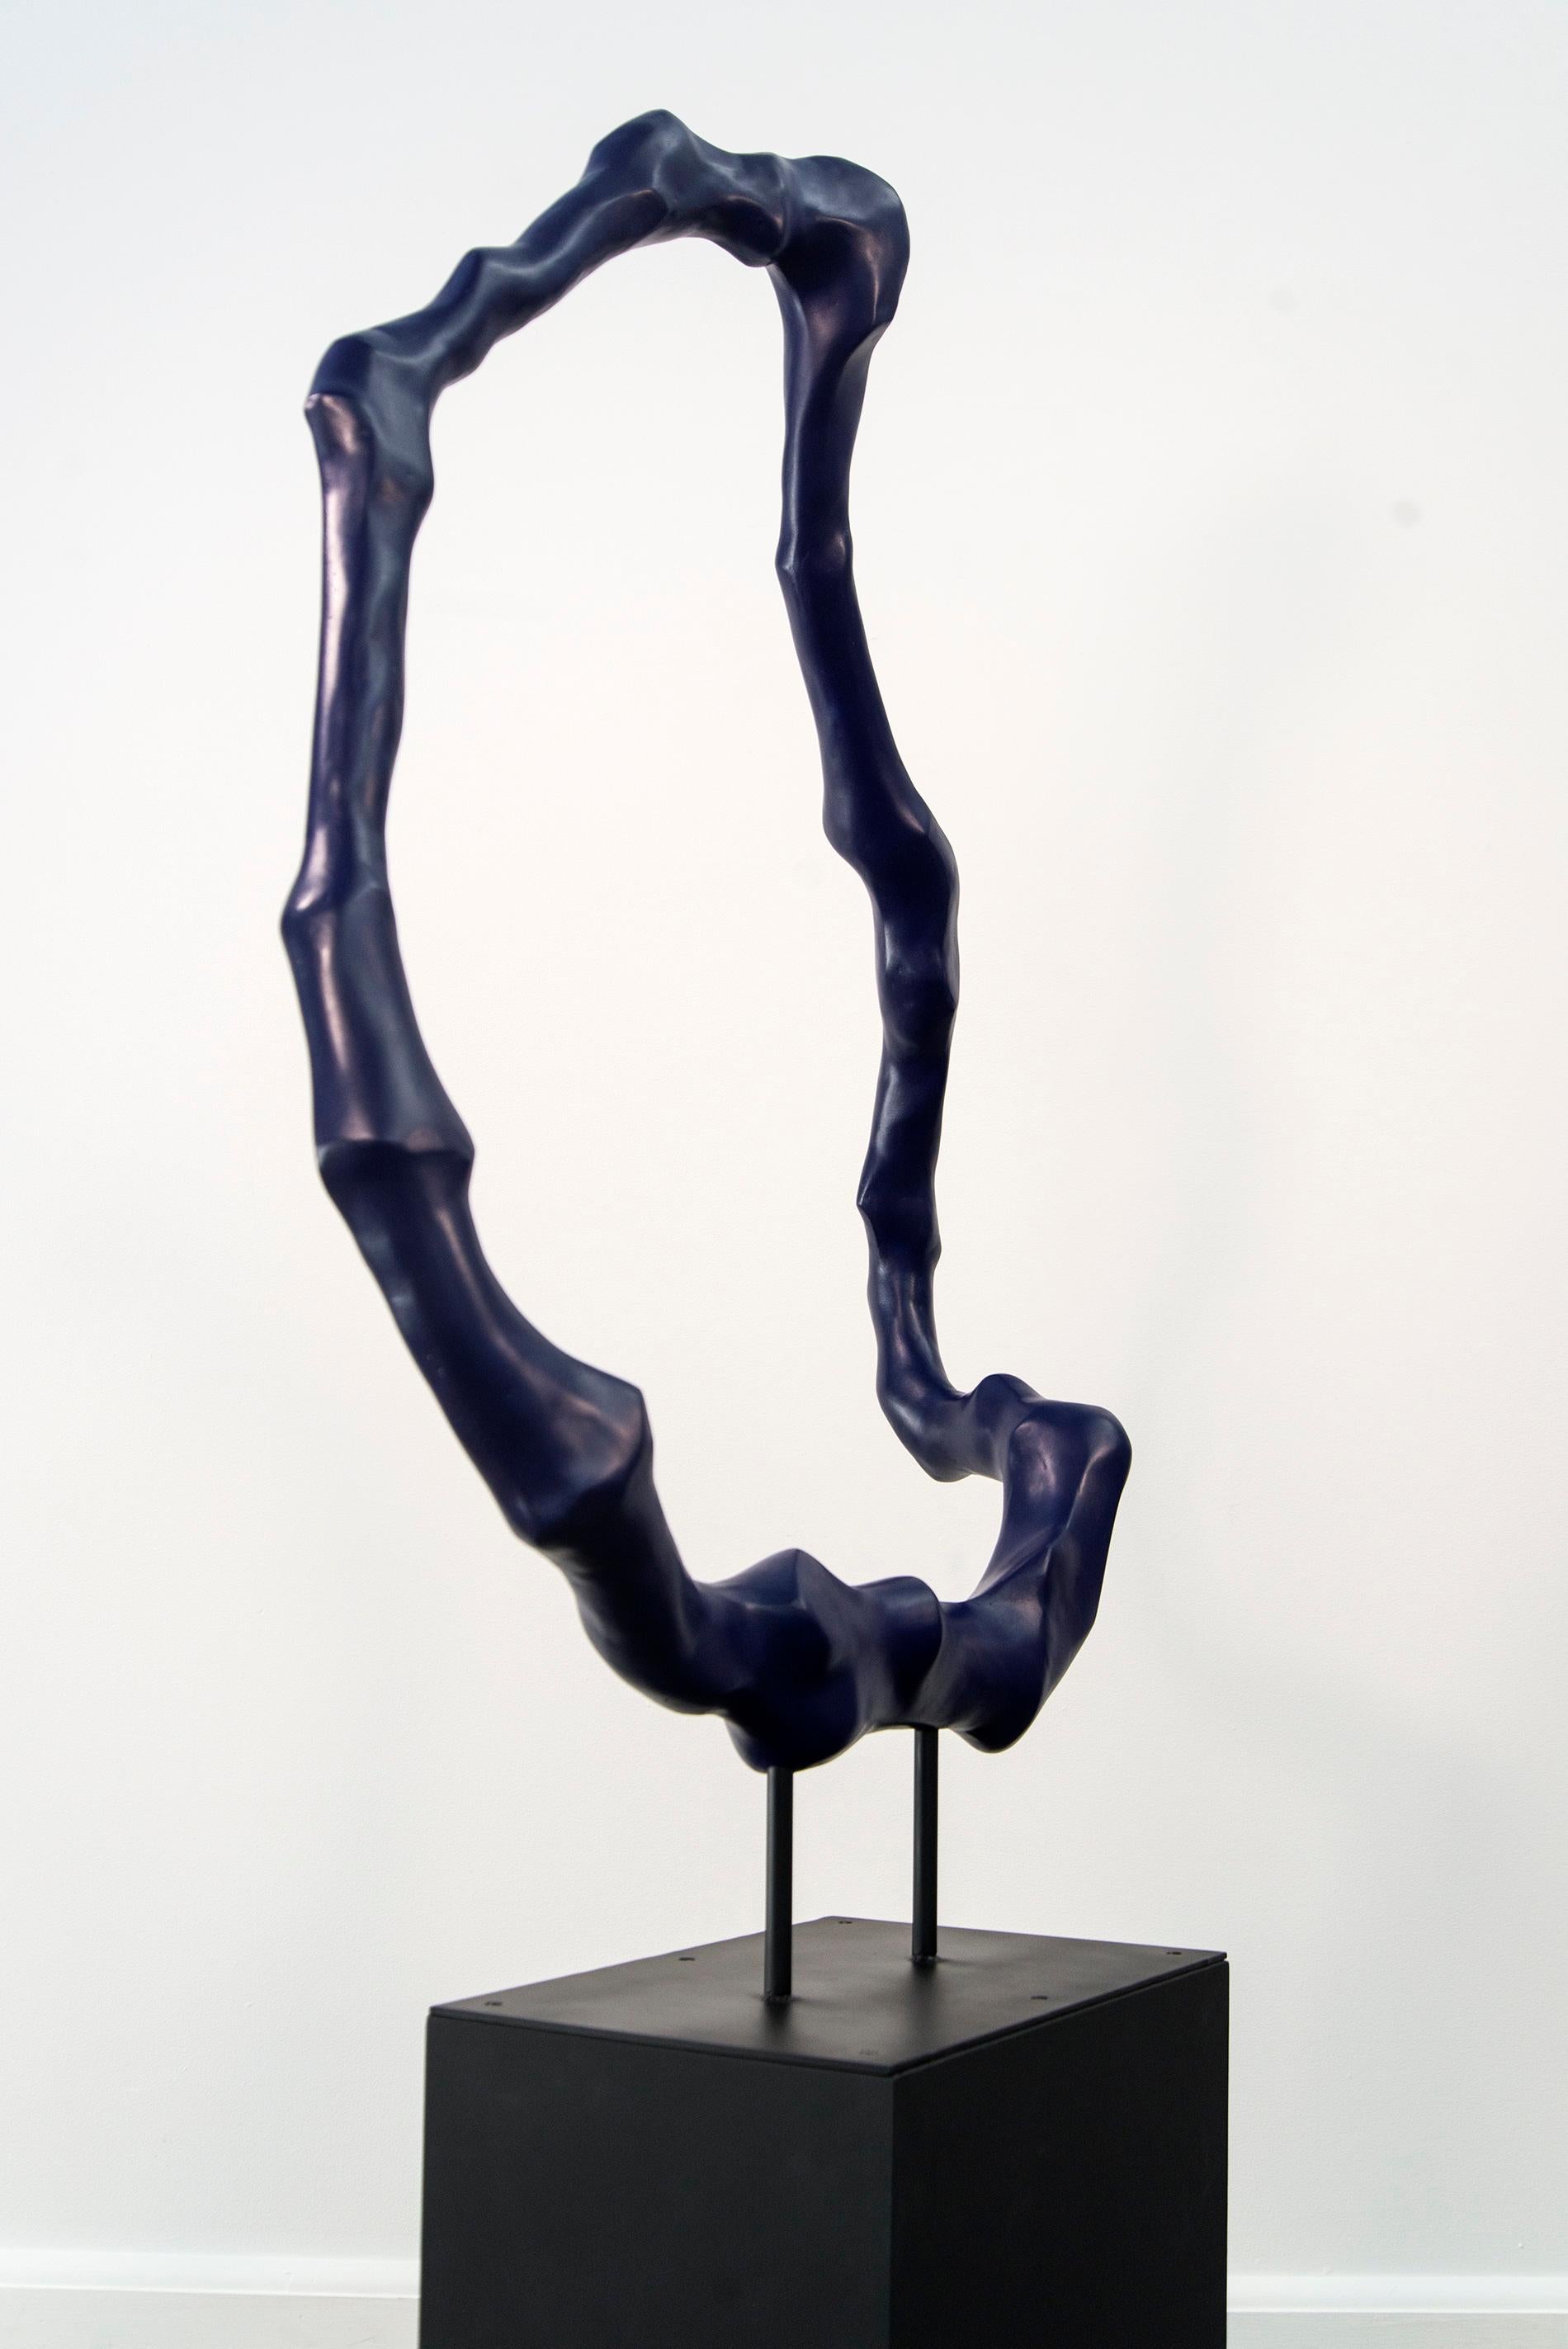 The natural world inspires the beautiful organic forms of artist Jana Osterman. This deep blue patinated winterstone sculpture suggests the shape and movement of tree roots. It is polished with a protective wax giving it a light sheen. 

“Tree roots